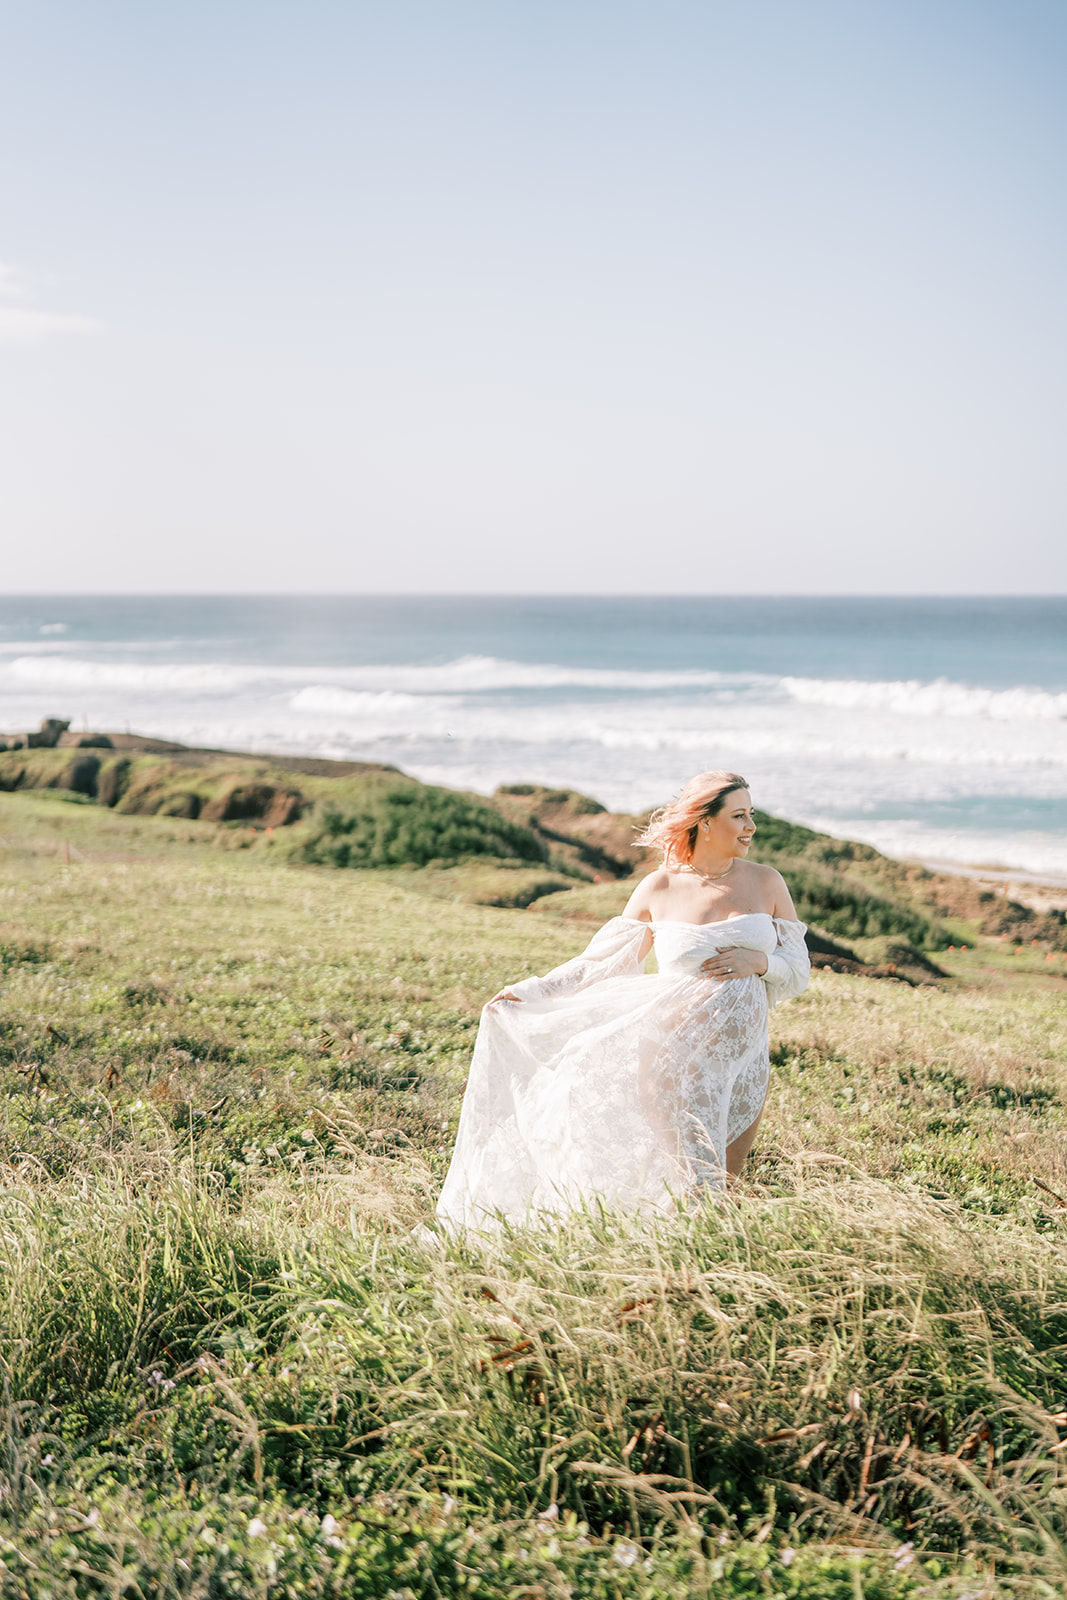 A woman in a white dress standing on a grassy field by the sea for her Maternity Session on Oahu.